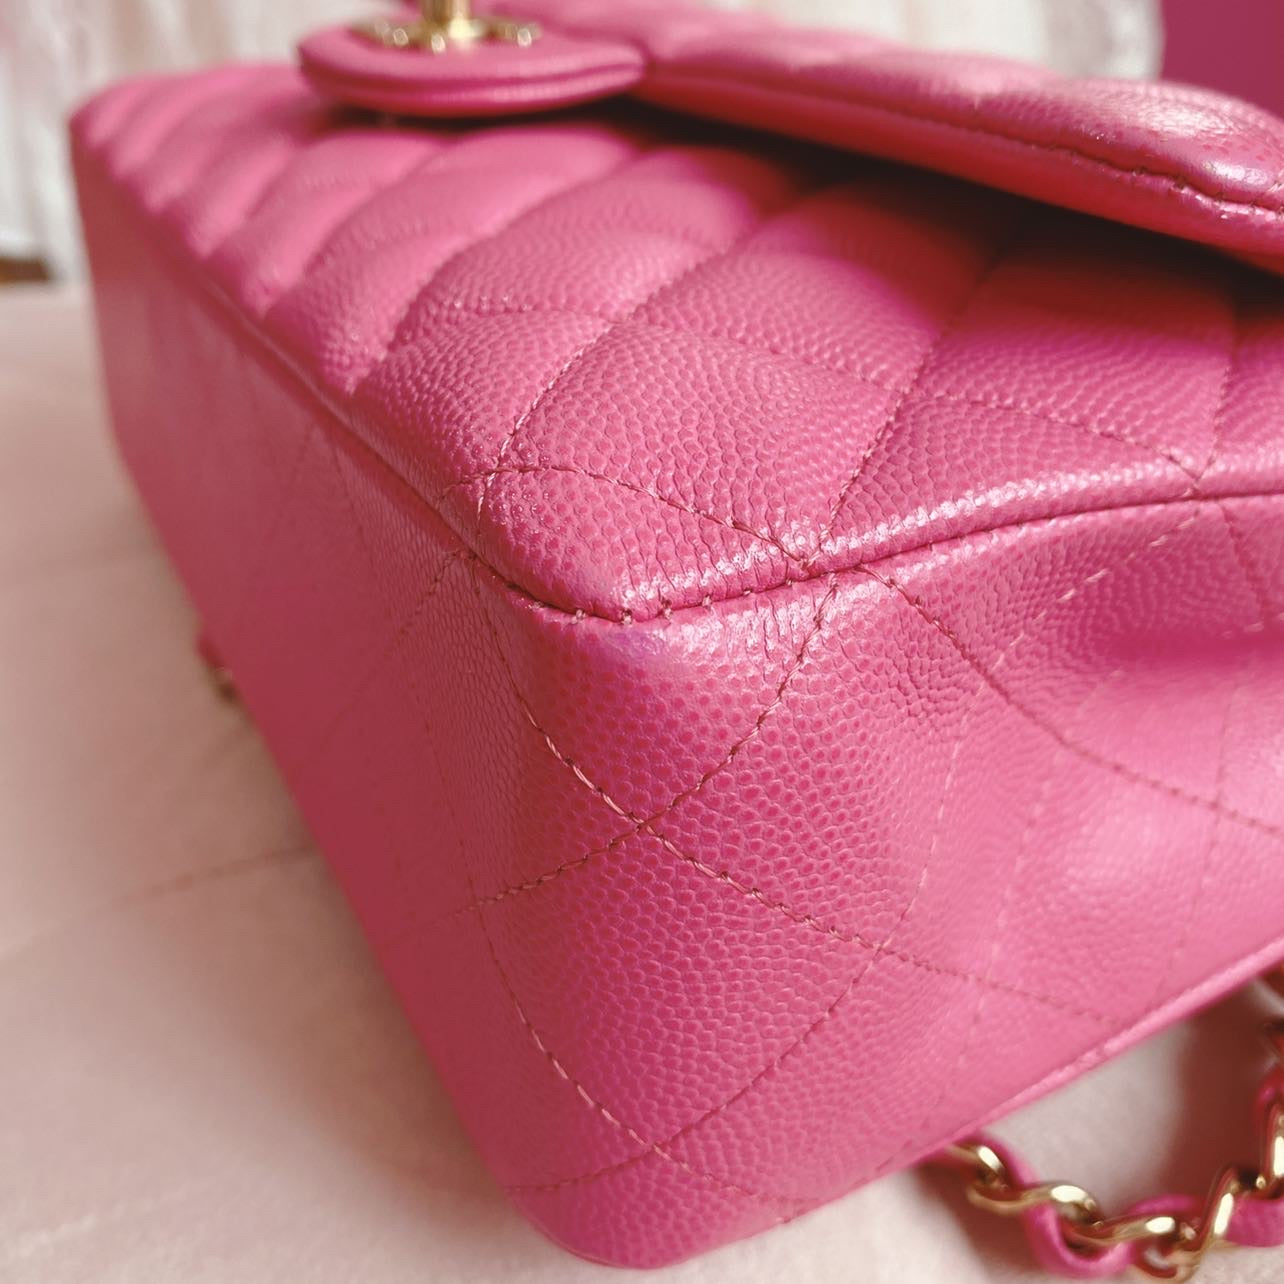 Chanel 19C collection Barbie Pink Caviar LGHW Medium ML timeless Classic  double flap bag